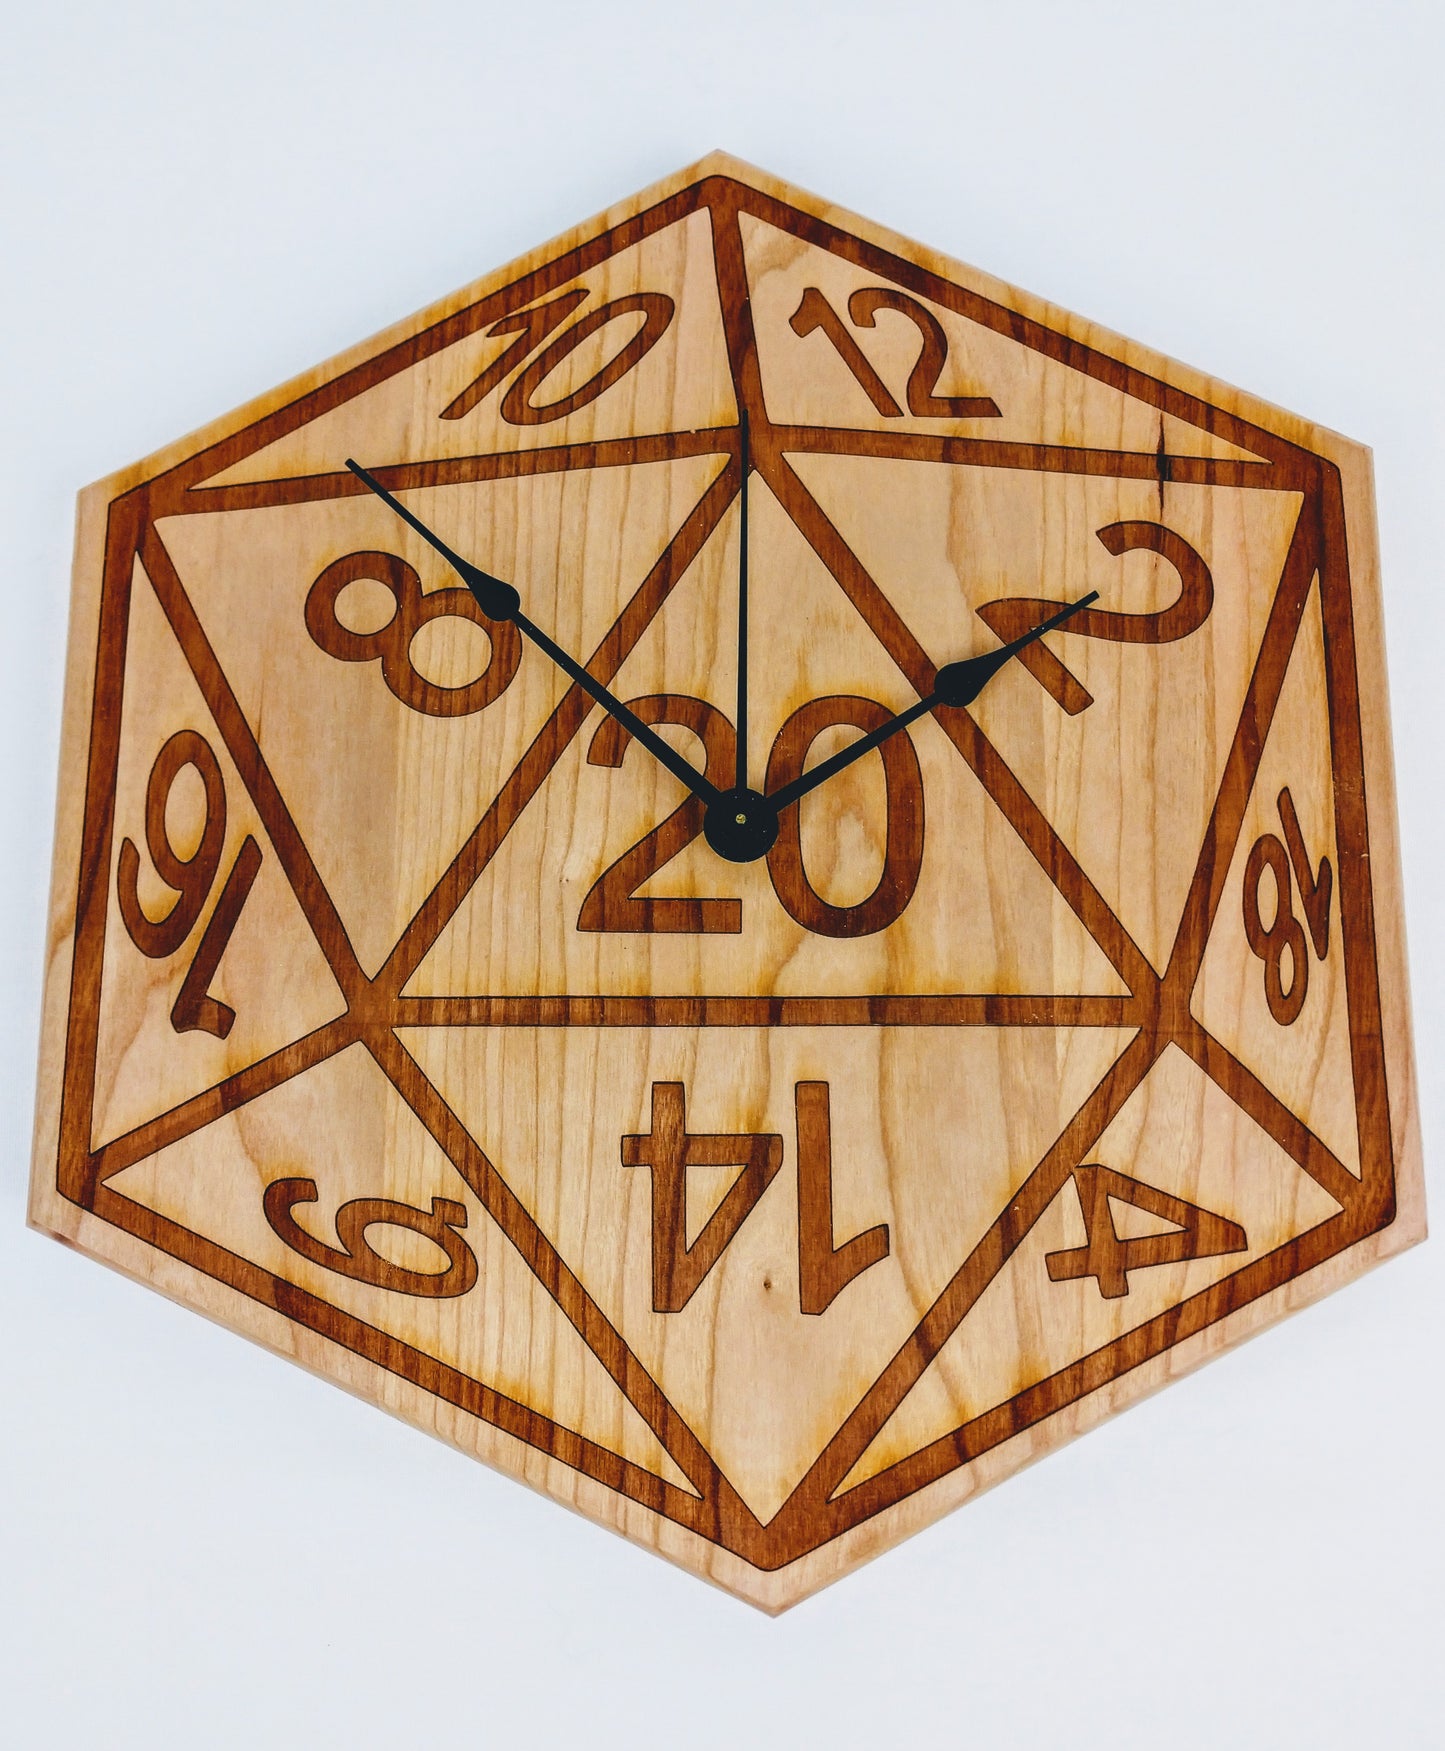 D20 Wall Clock in Solid American Cherry Wood - Hard Candy Woodshop